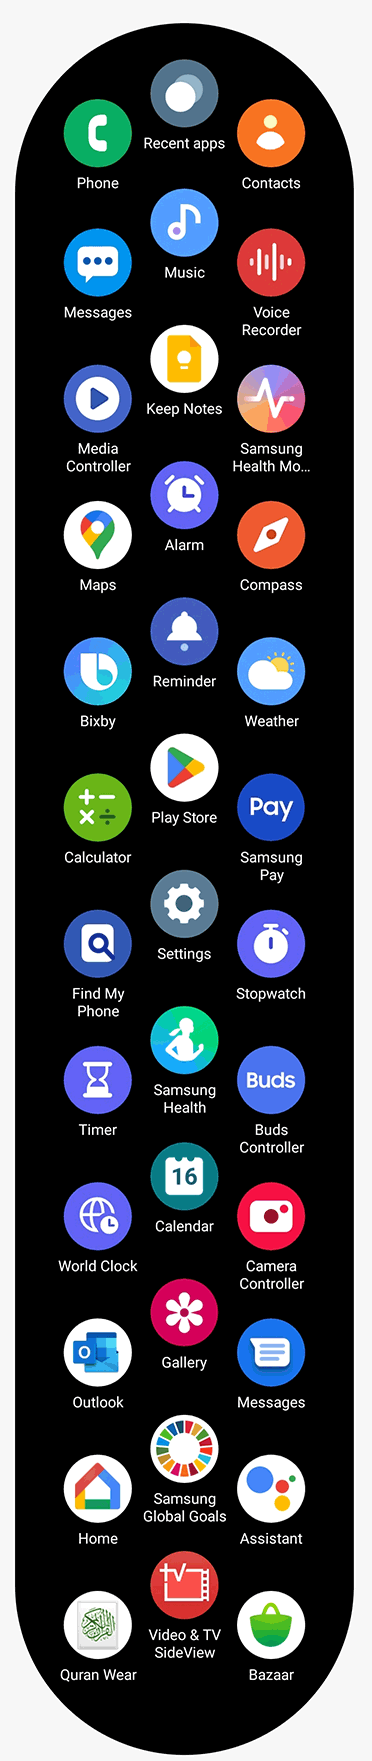 galaxy_watch5_applications.png (372×1761)